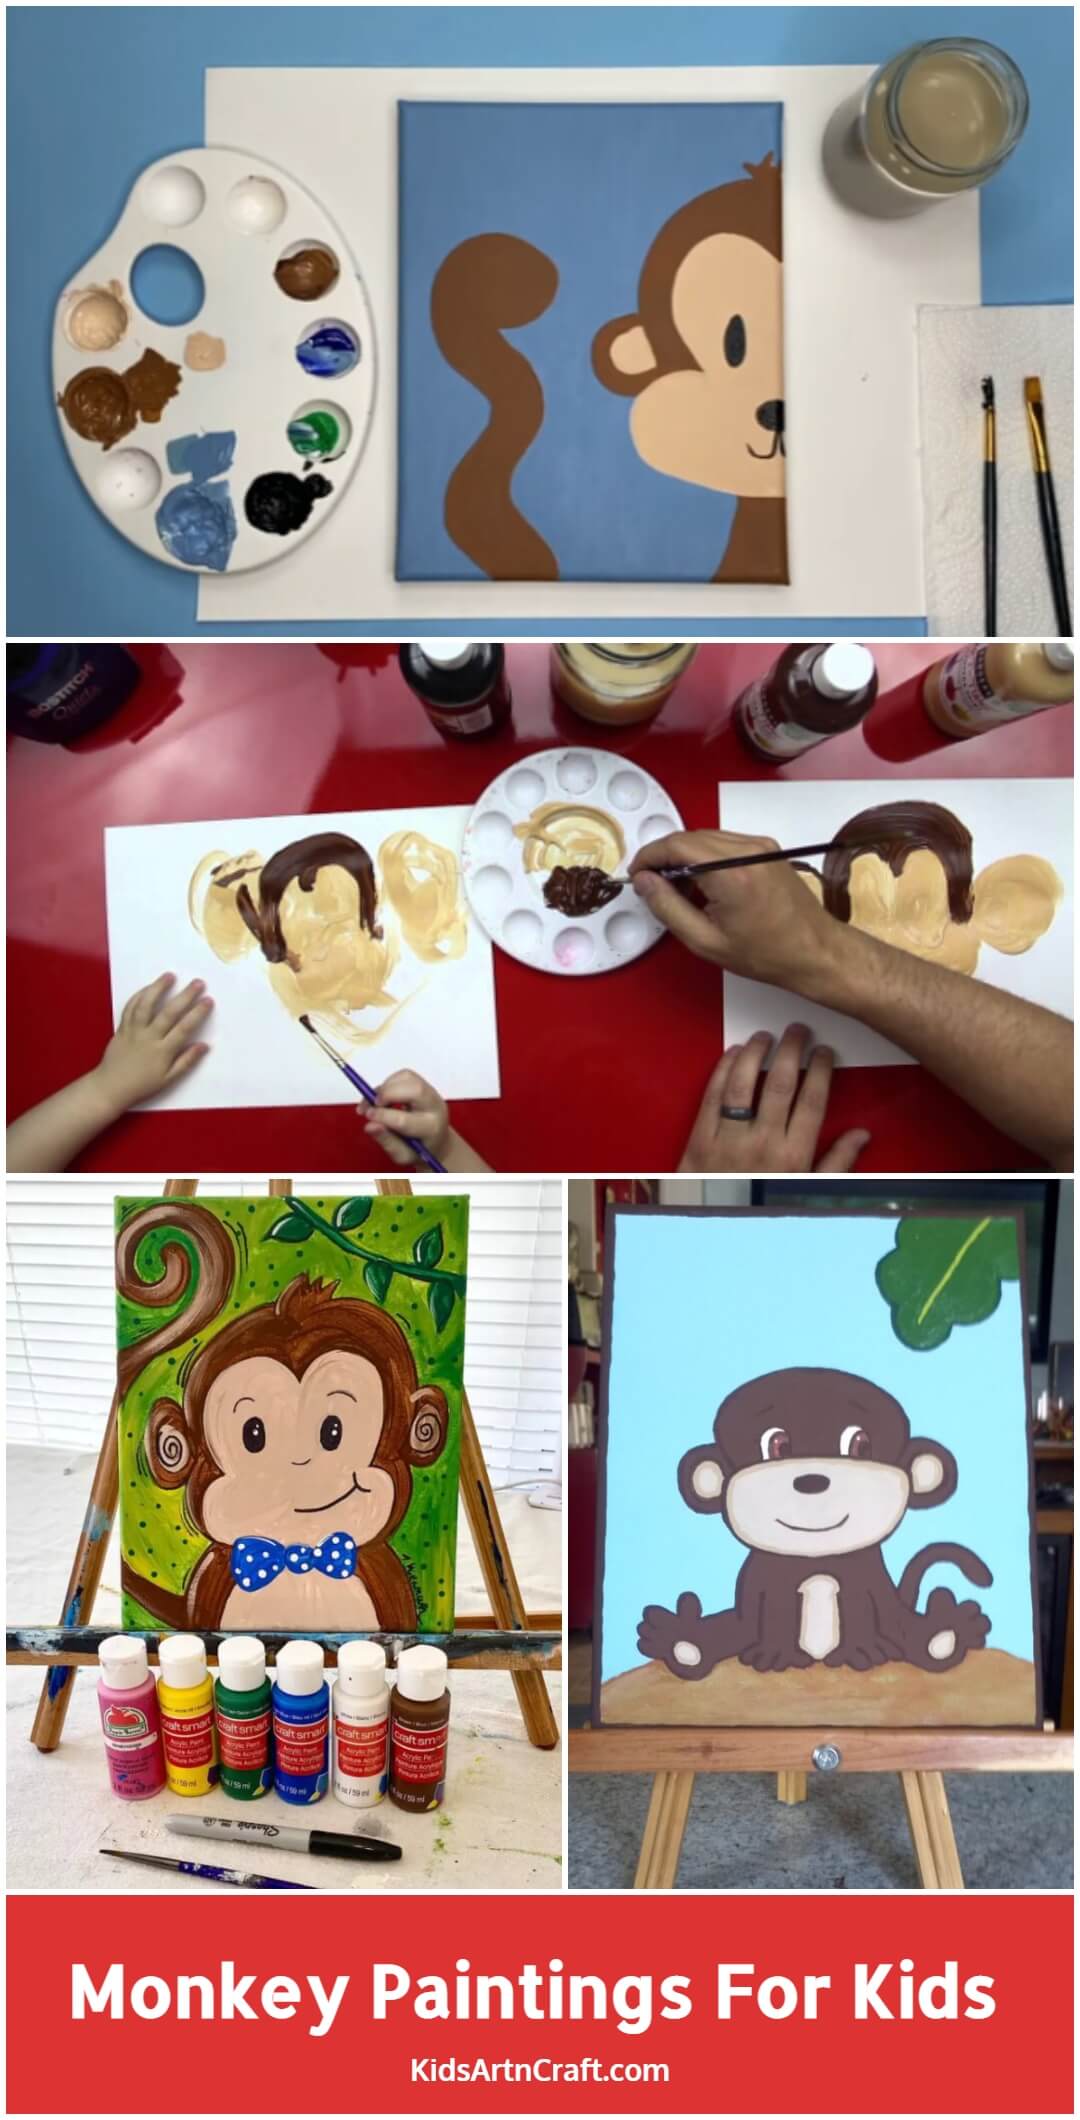 Monkey Paintings For Kids